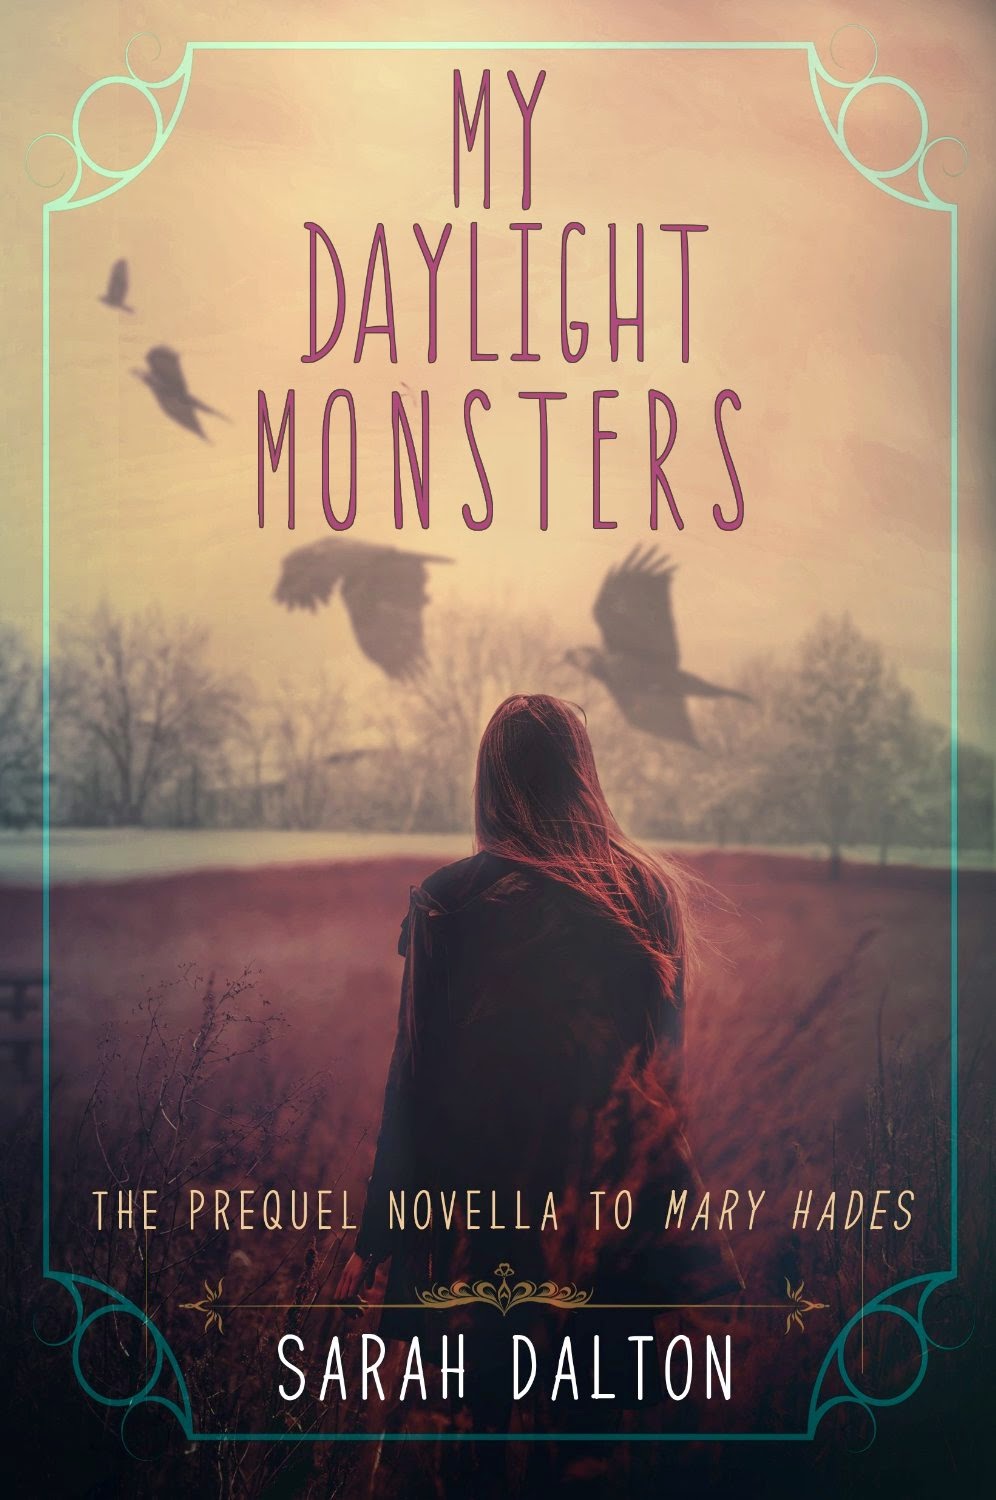 My Daylight Monsters by Sarah Dalton book cover